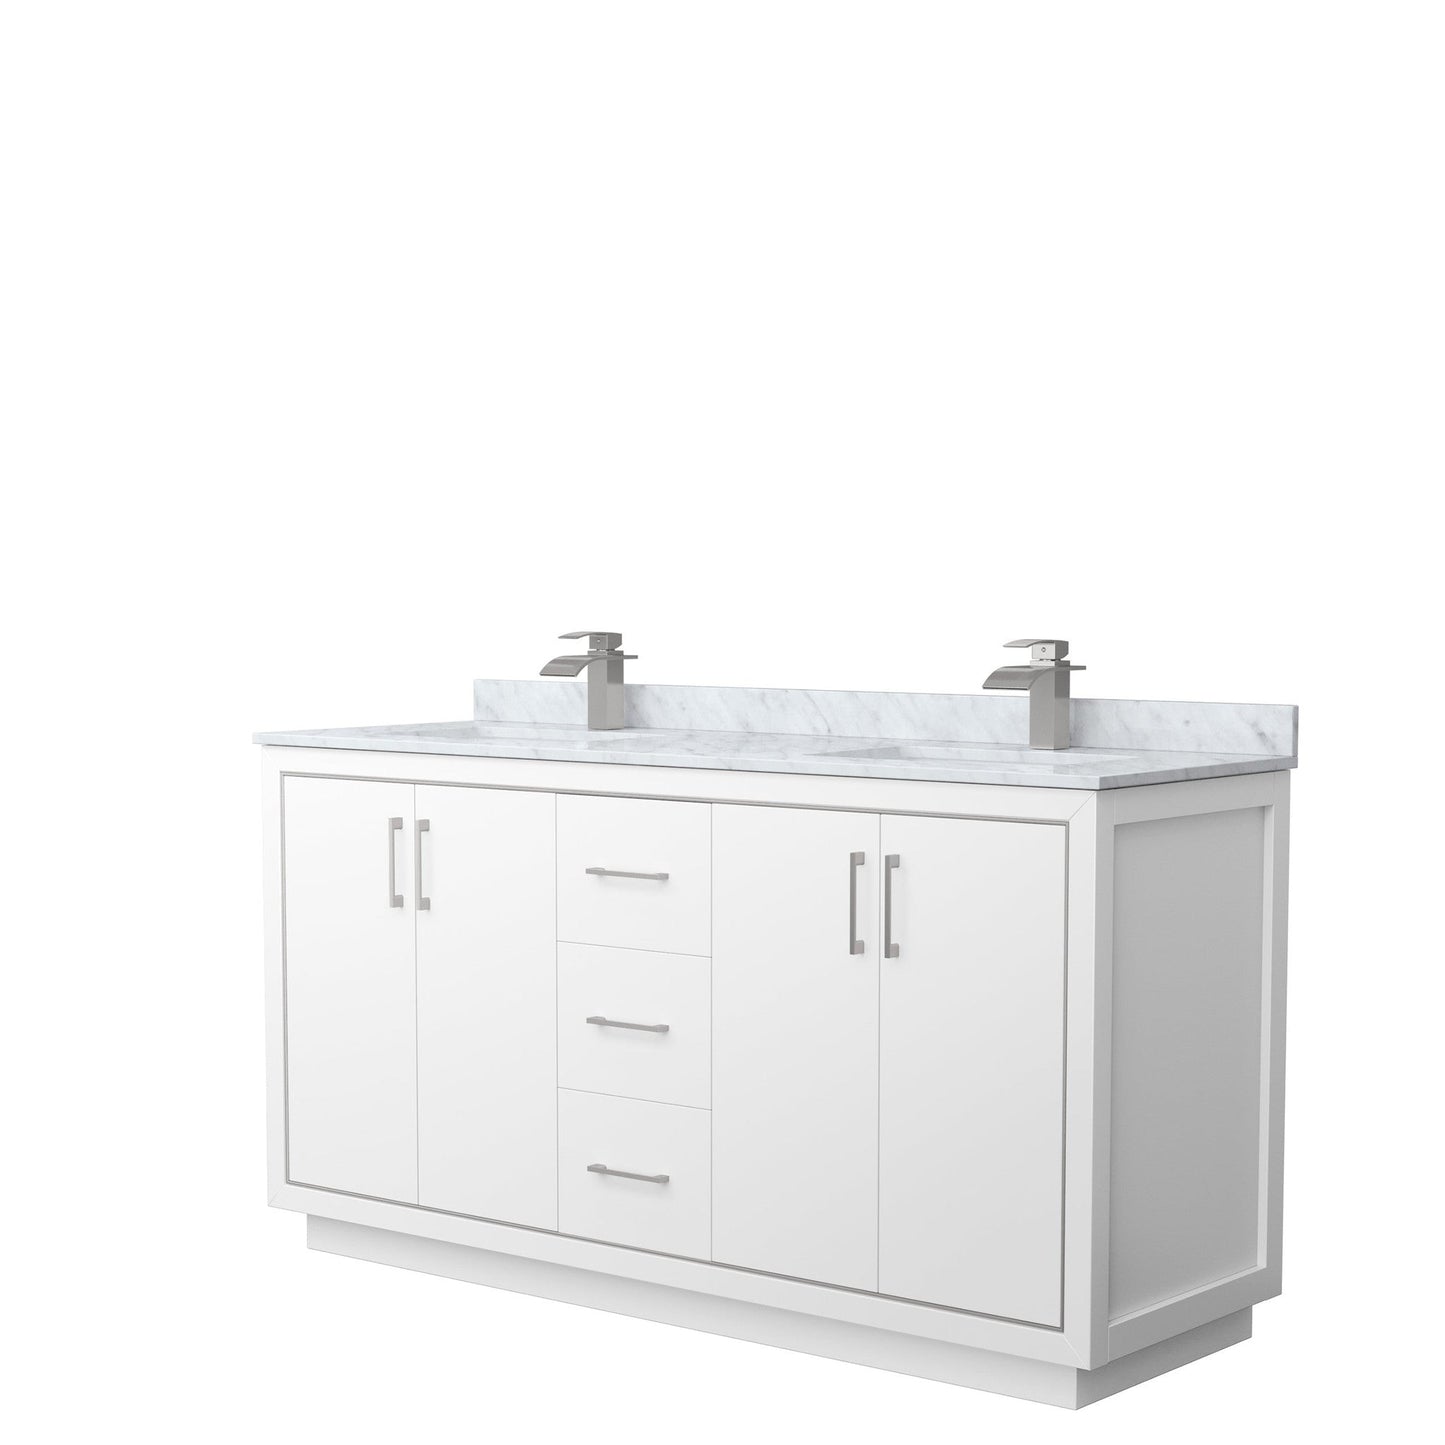 Wyndham Collection Icon 66" Double Bathroom Vanity in White, White Carrara Marble Countertop, Undermount Square Sinks, Brushed Nickel Trim